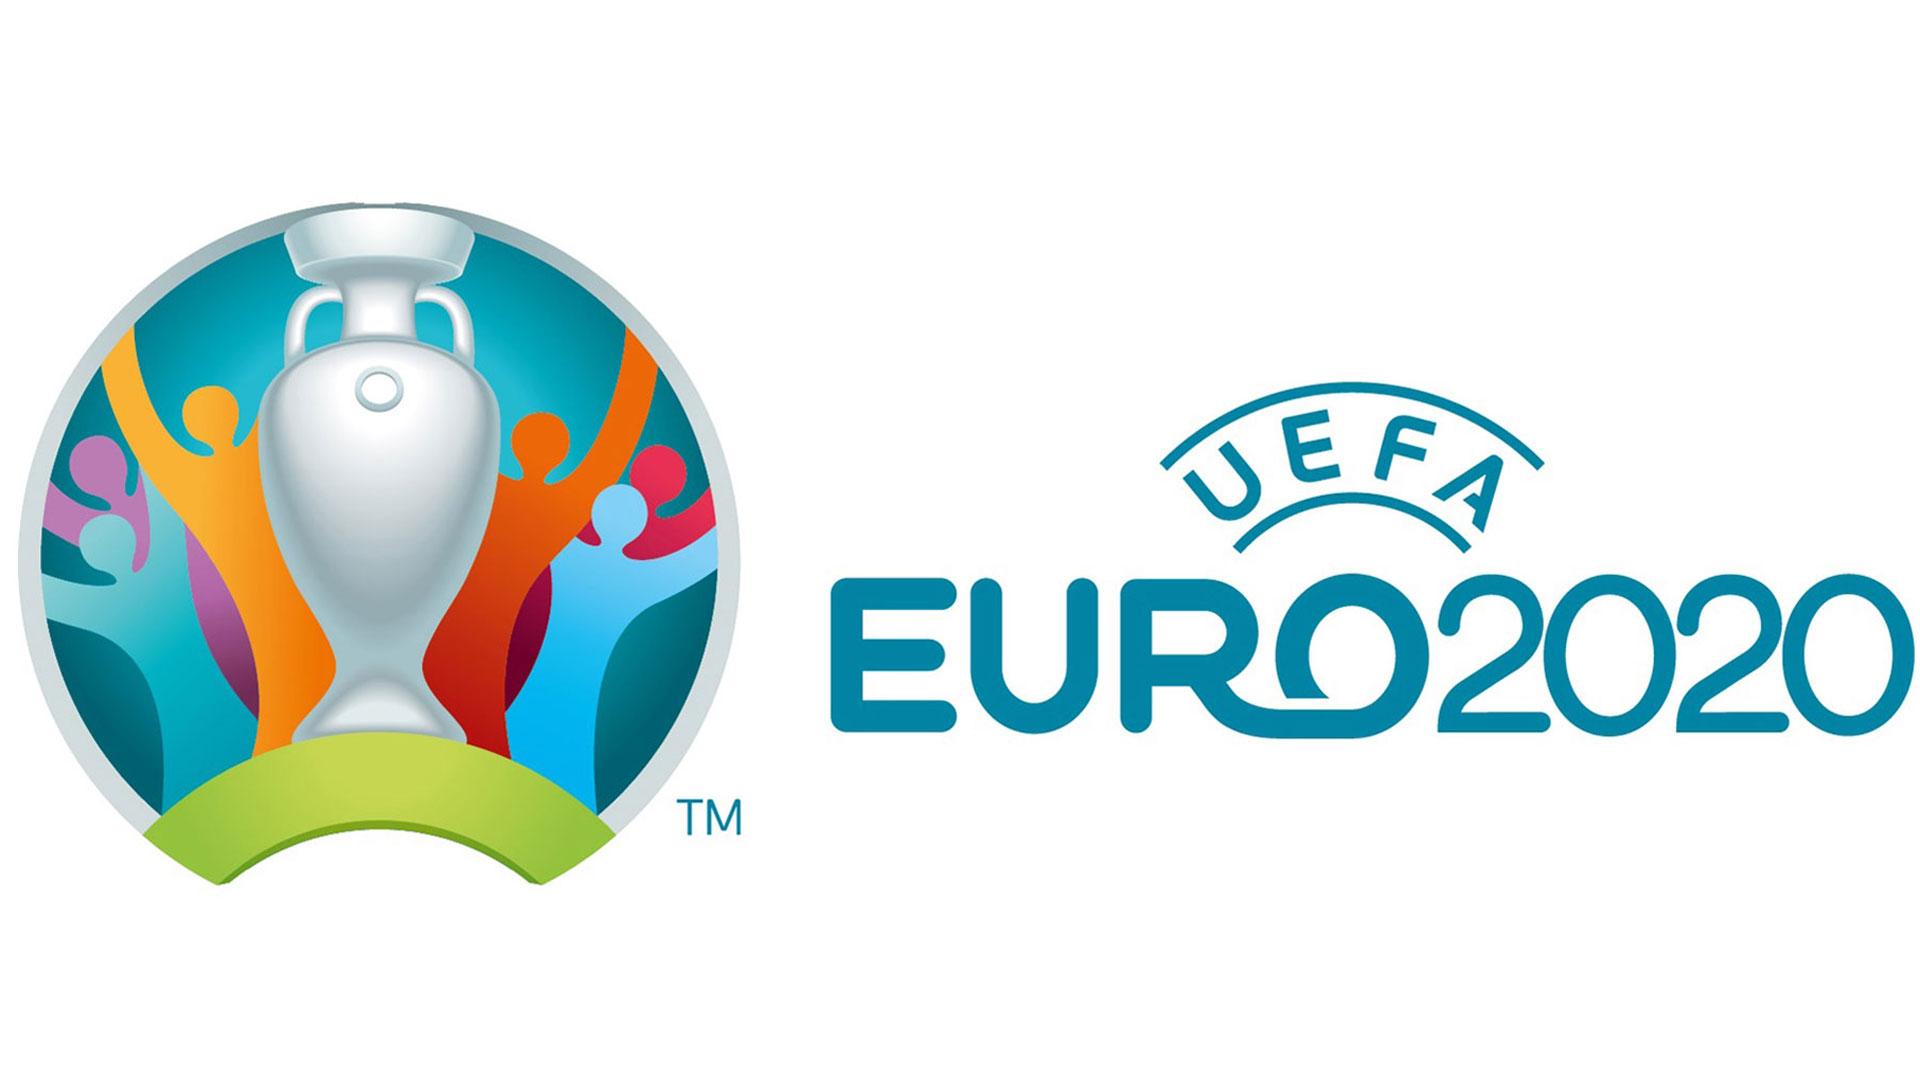 Tickets for UEFA EURO 2020